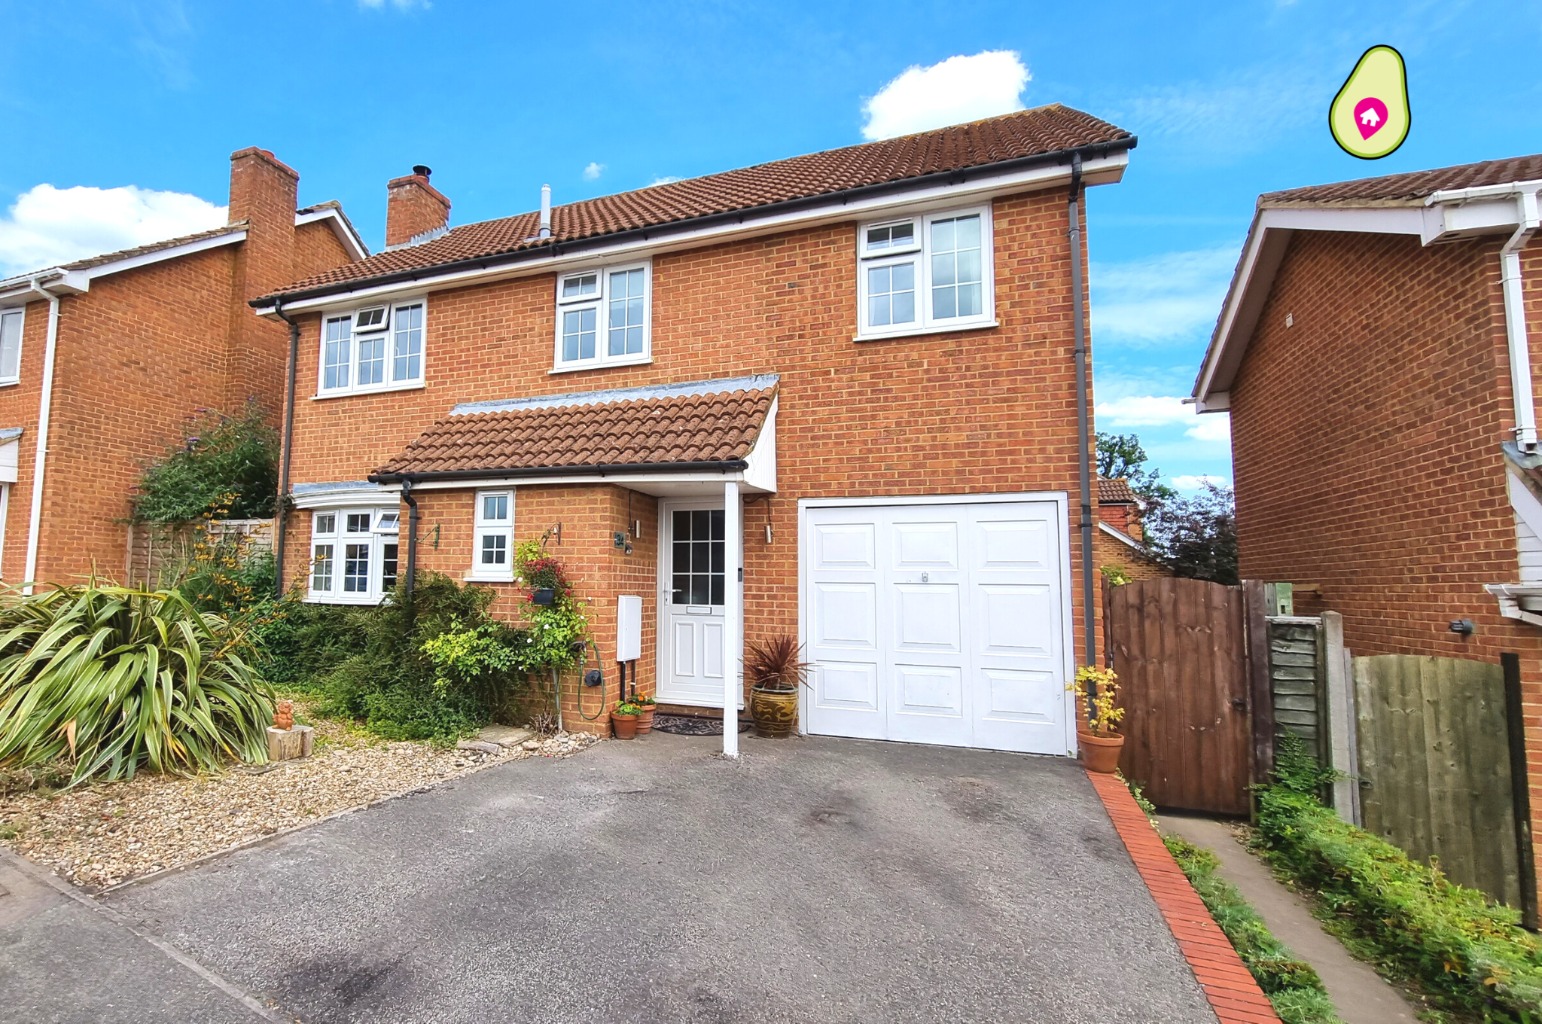 This is an excellent family home in a popular location. You are walking distance to lovely parks, local schools and amenities. Please watch our video for more details